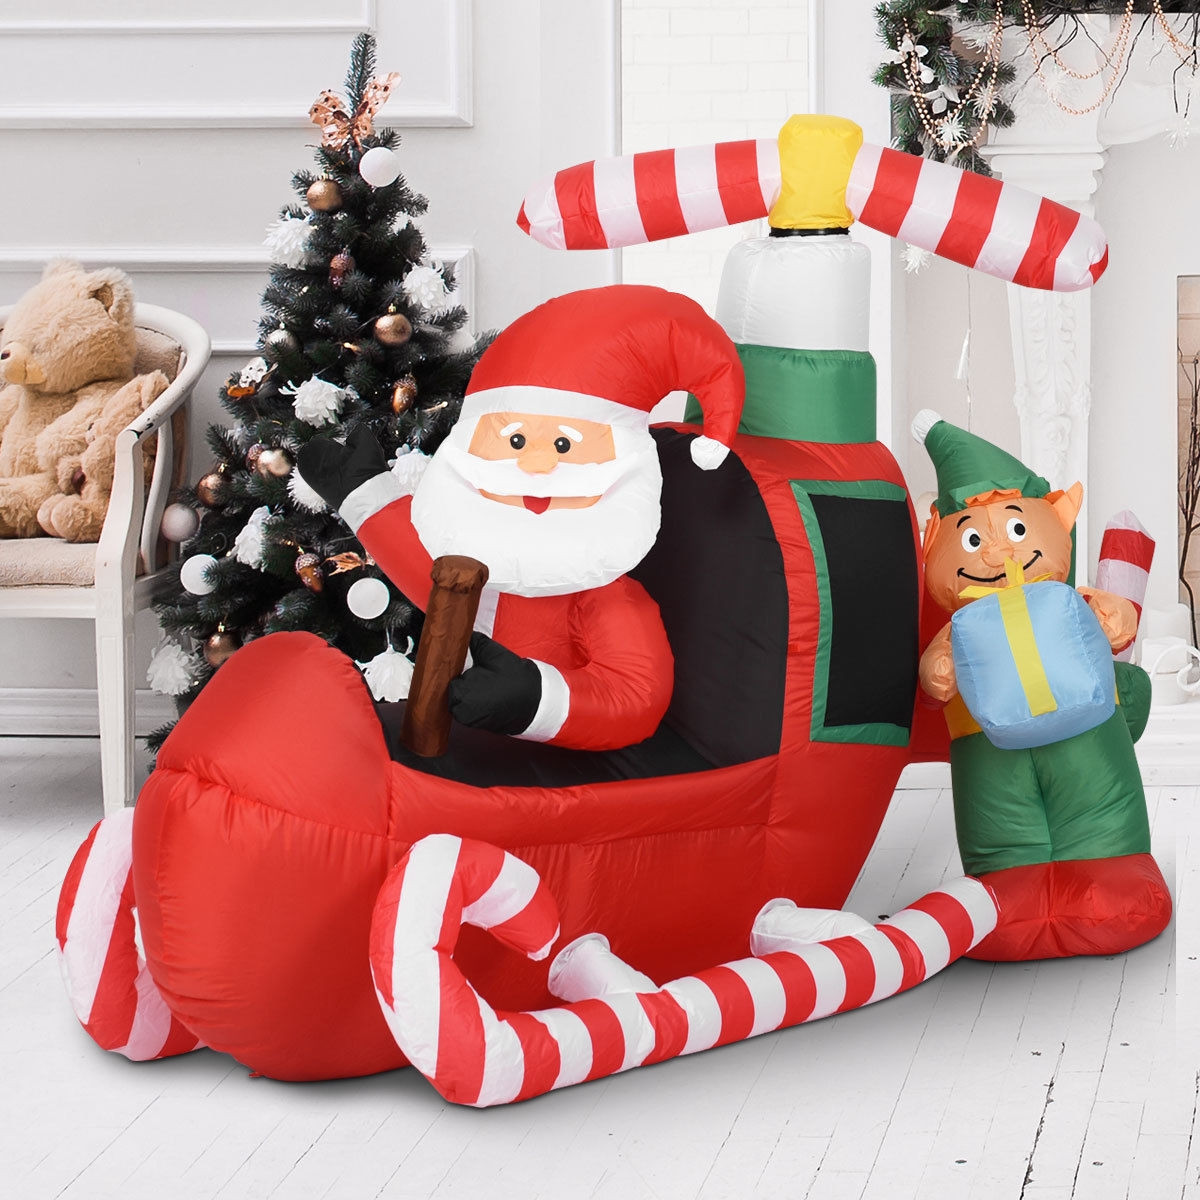 6 Ft. Christmas Decoration Inflatable Flying Airplane Santa